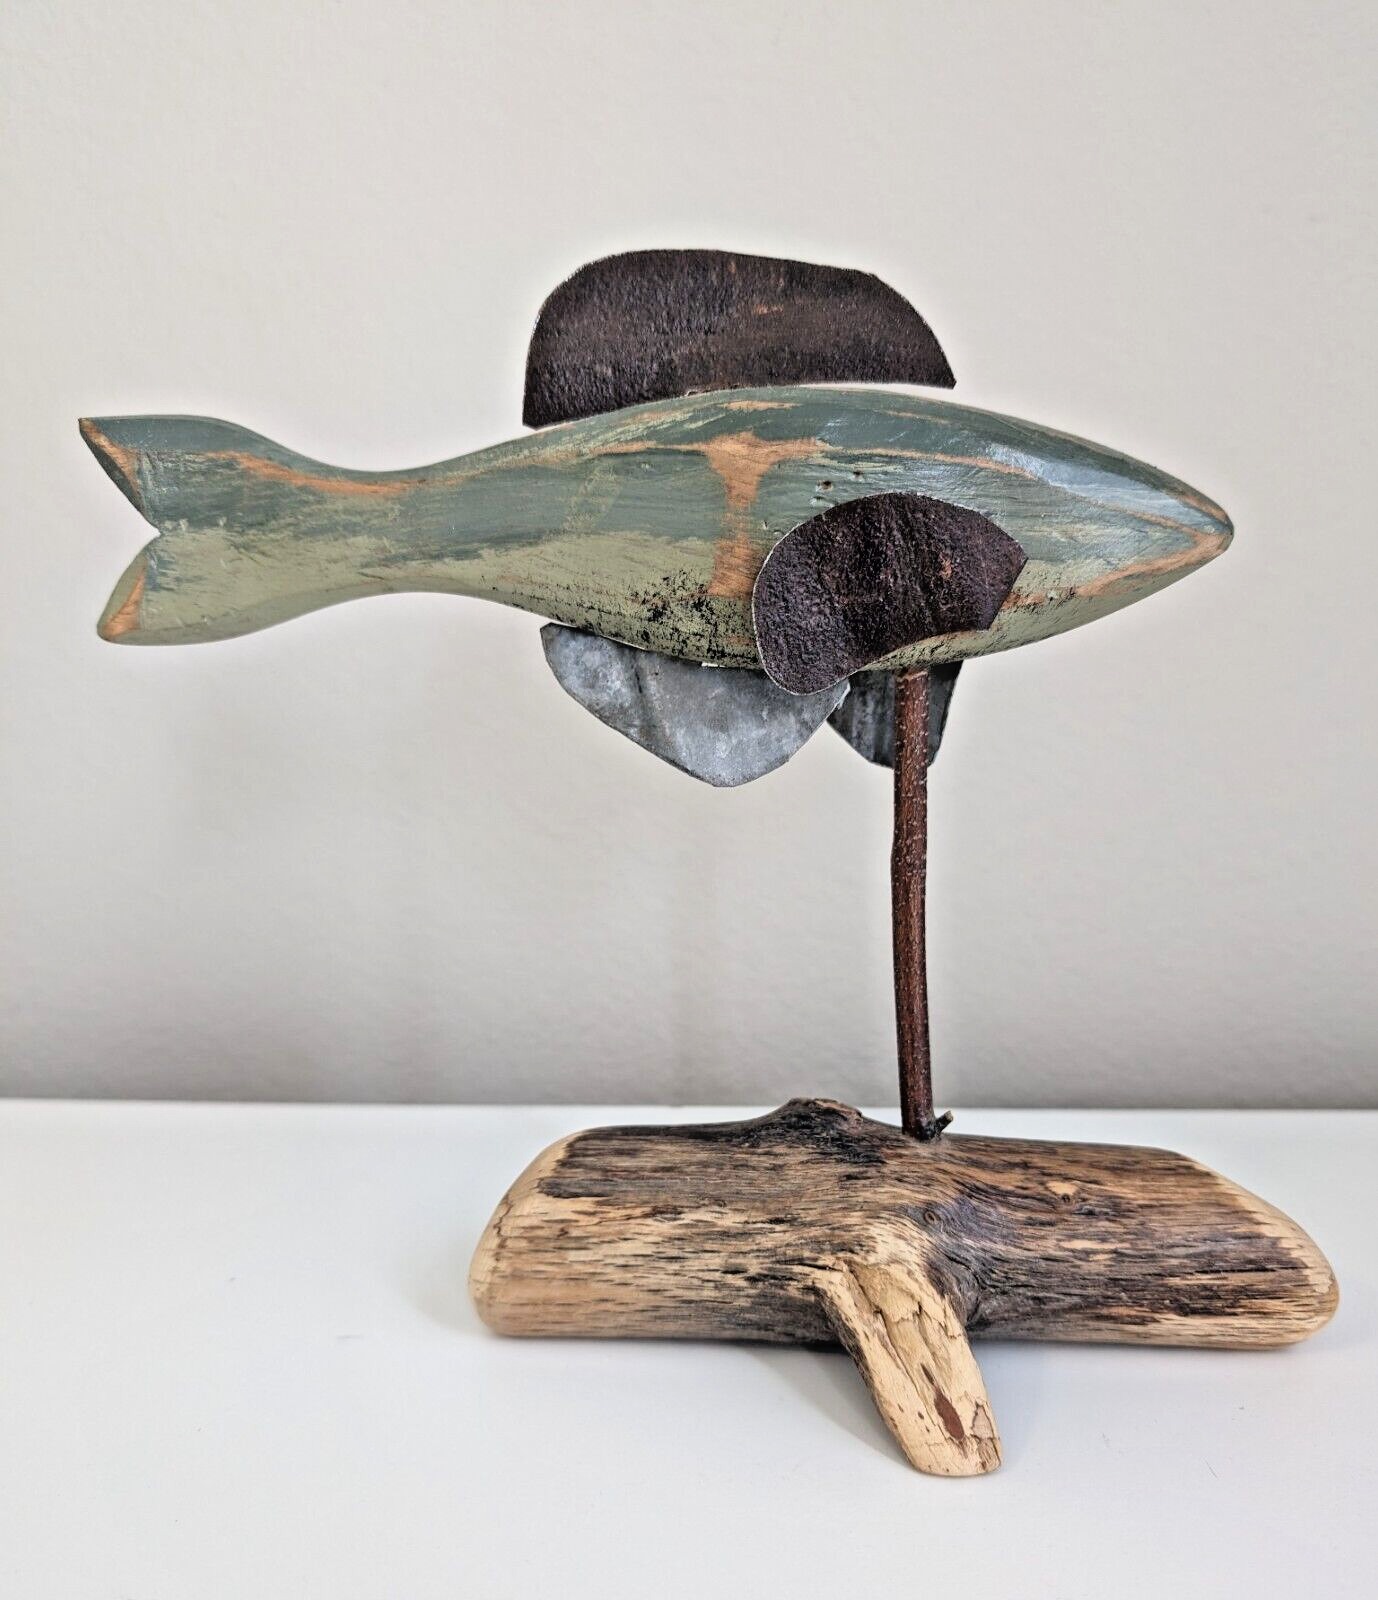 Primitive fish sculpture wood carved rustic rusty metal on stand driftwood folk